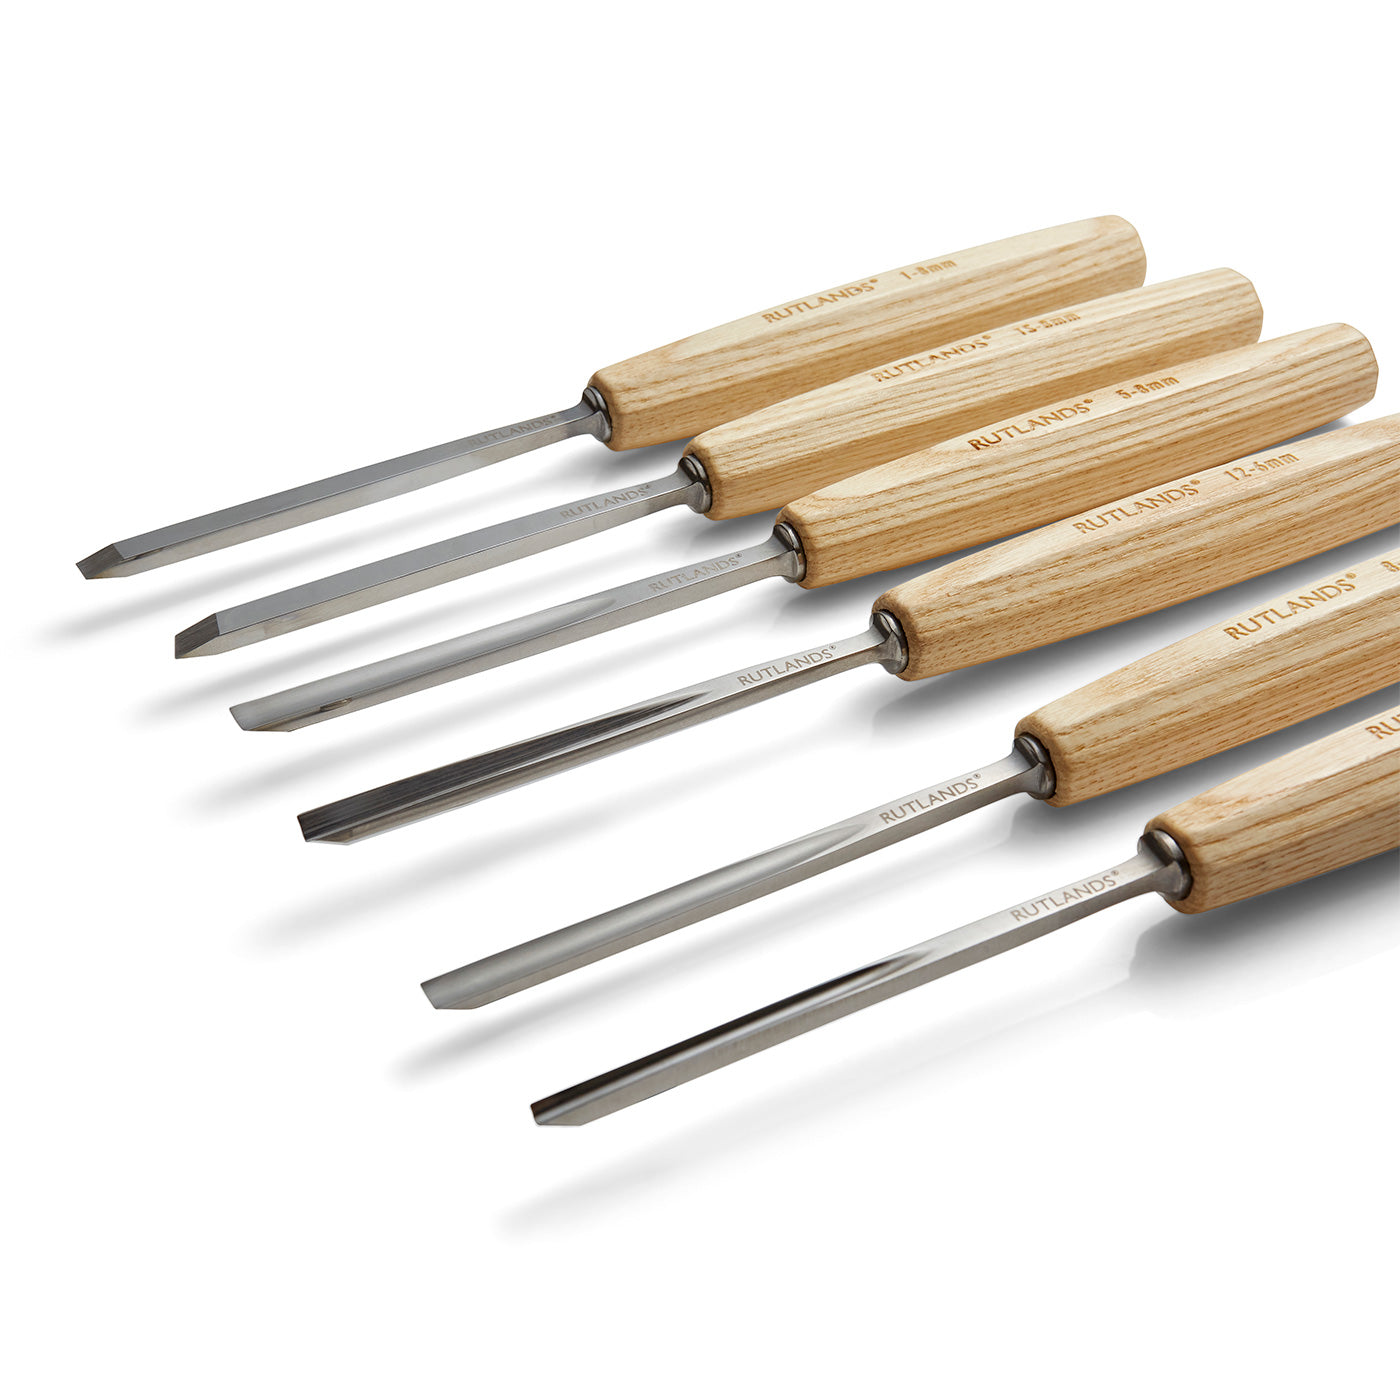 Carving Tools - Set of 6